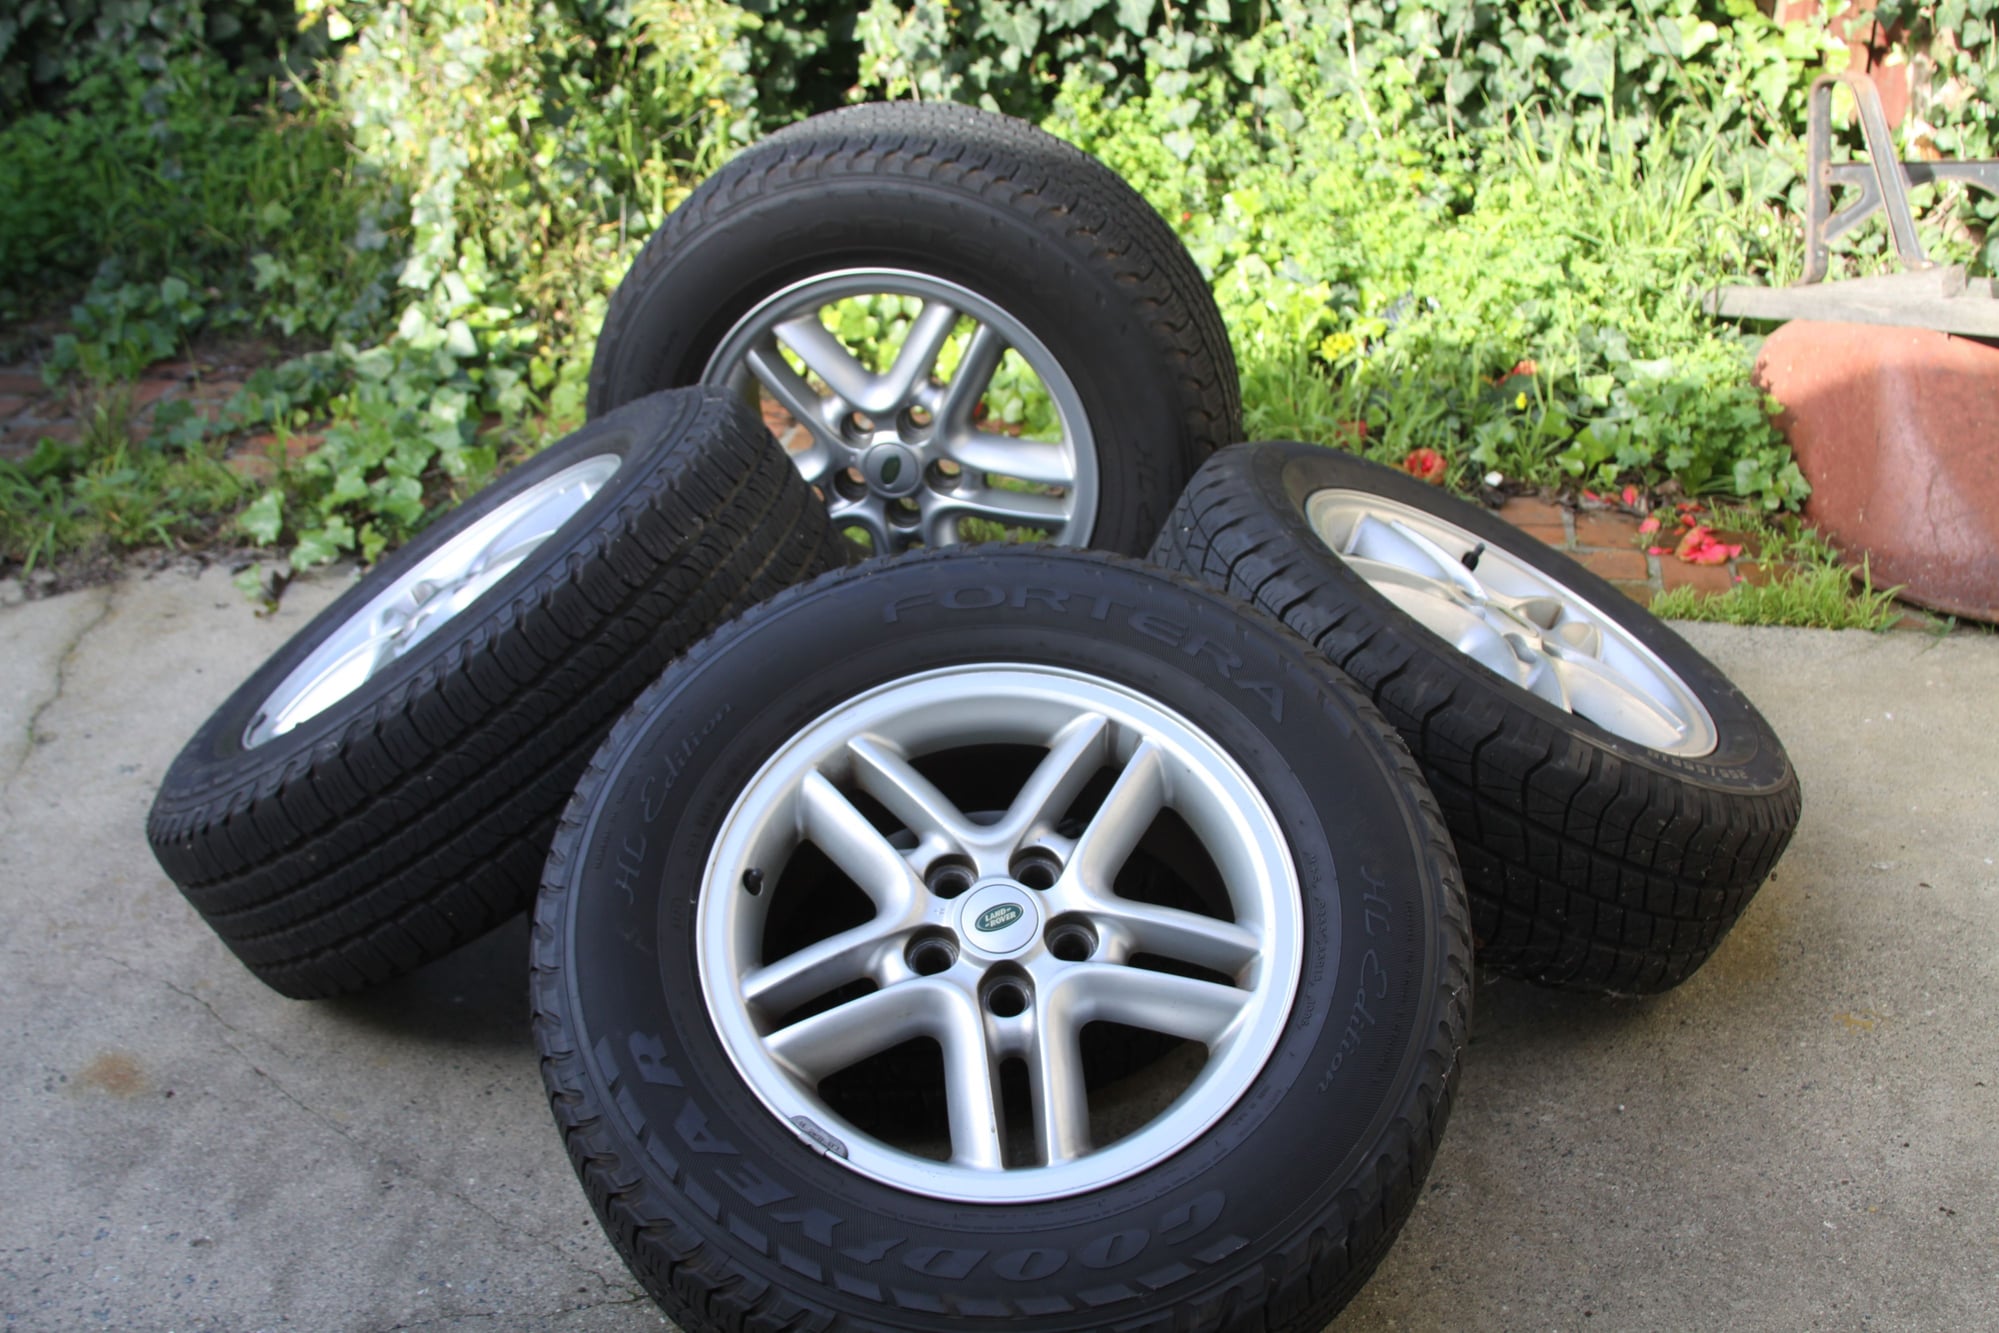 Wheels and Tires/Axles - 5pc wheel\tire set $1,000 - Used - 2000 to 2004 Land Rover Discovery - Santa Cruz, CA 95062, United States